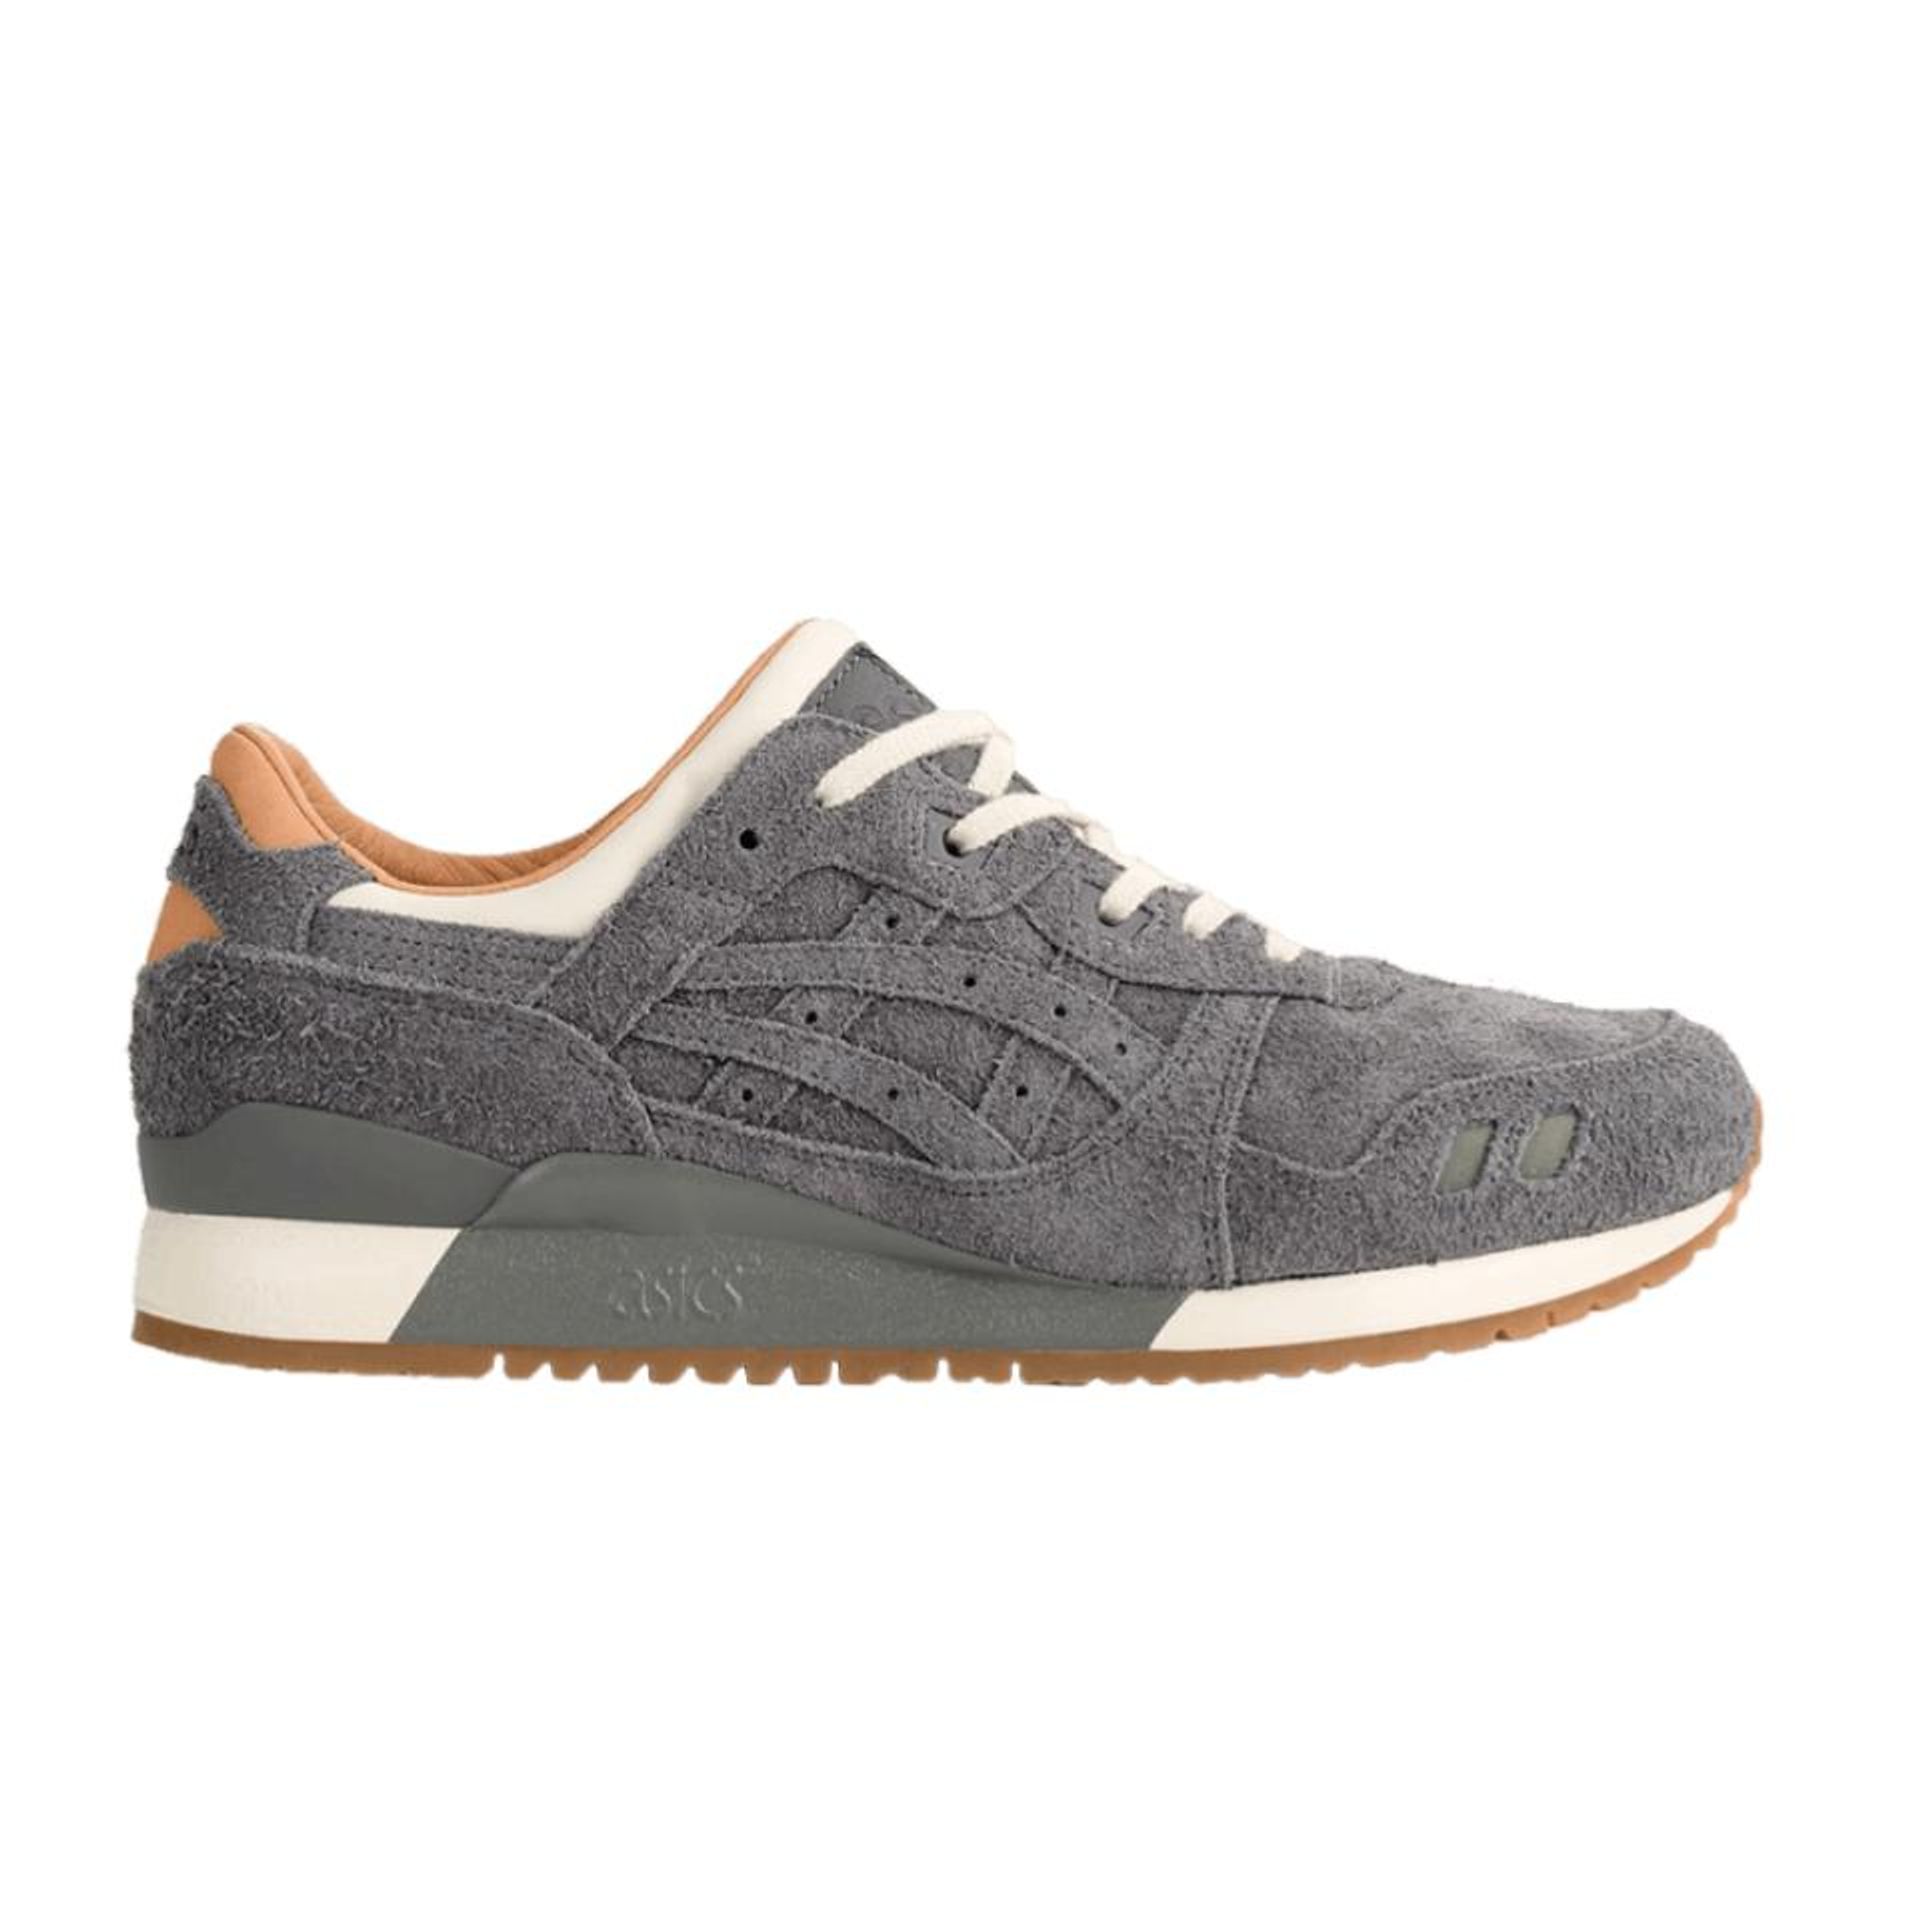 Packer Shoes x J.Crew x Gel Lyte 3 '1907 Collection Charcoal'